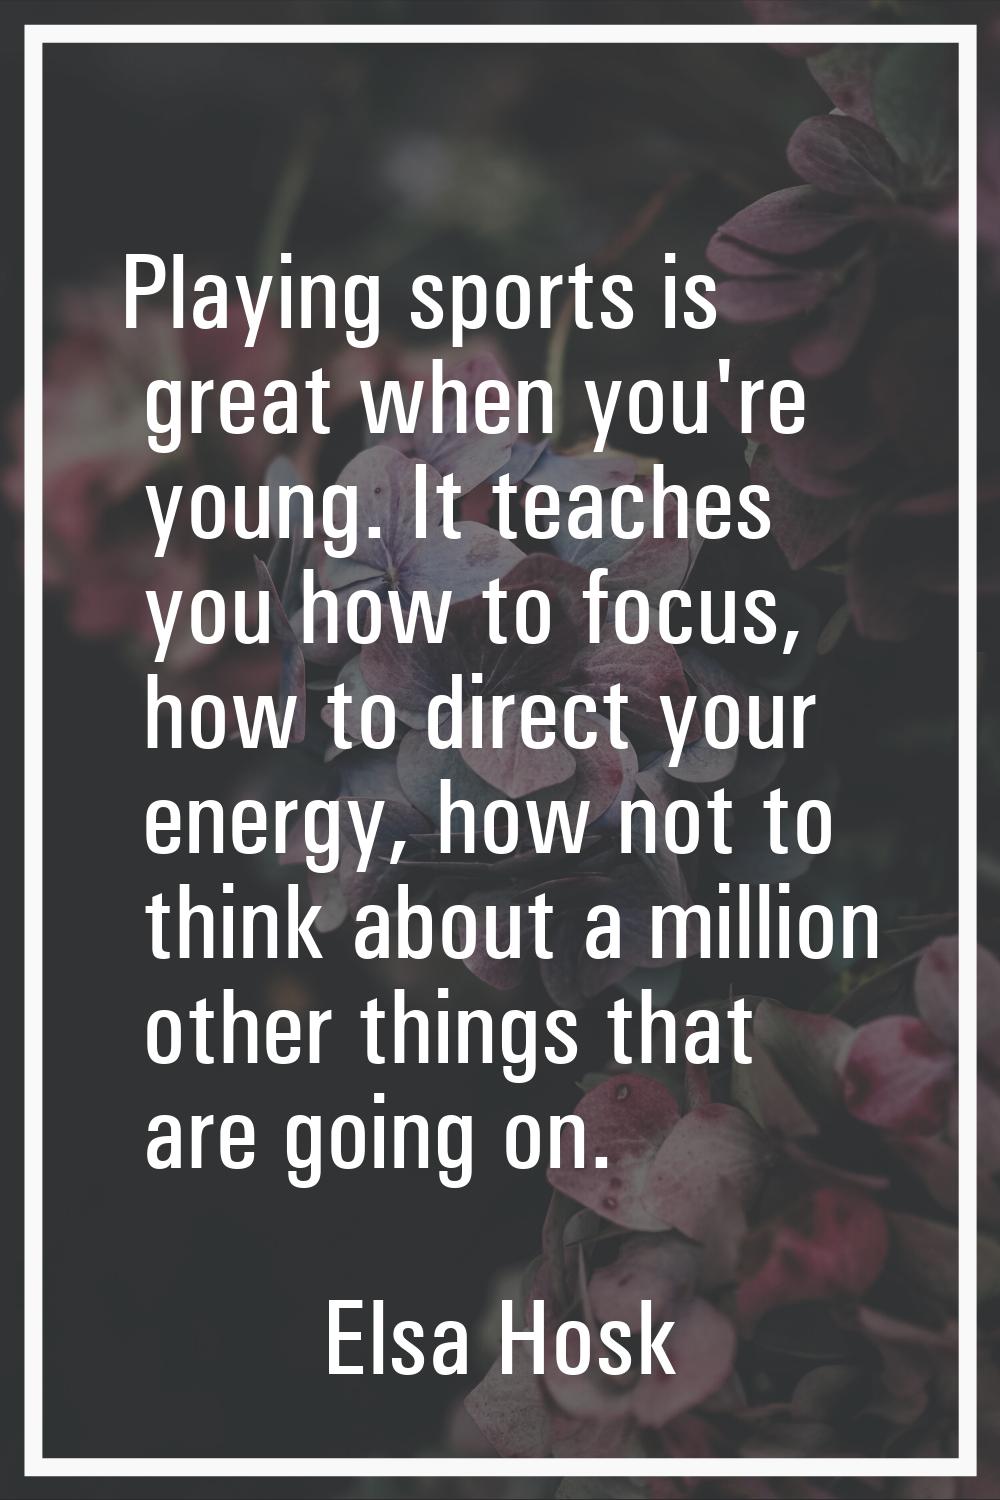 Playing sports is great when you're young. It teaches you how to focus, how to direct your energy, 